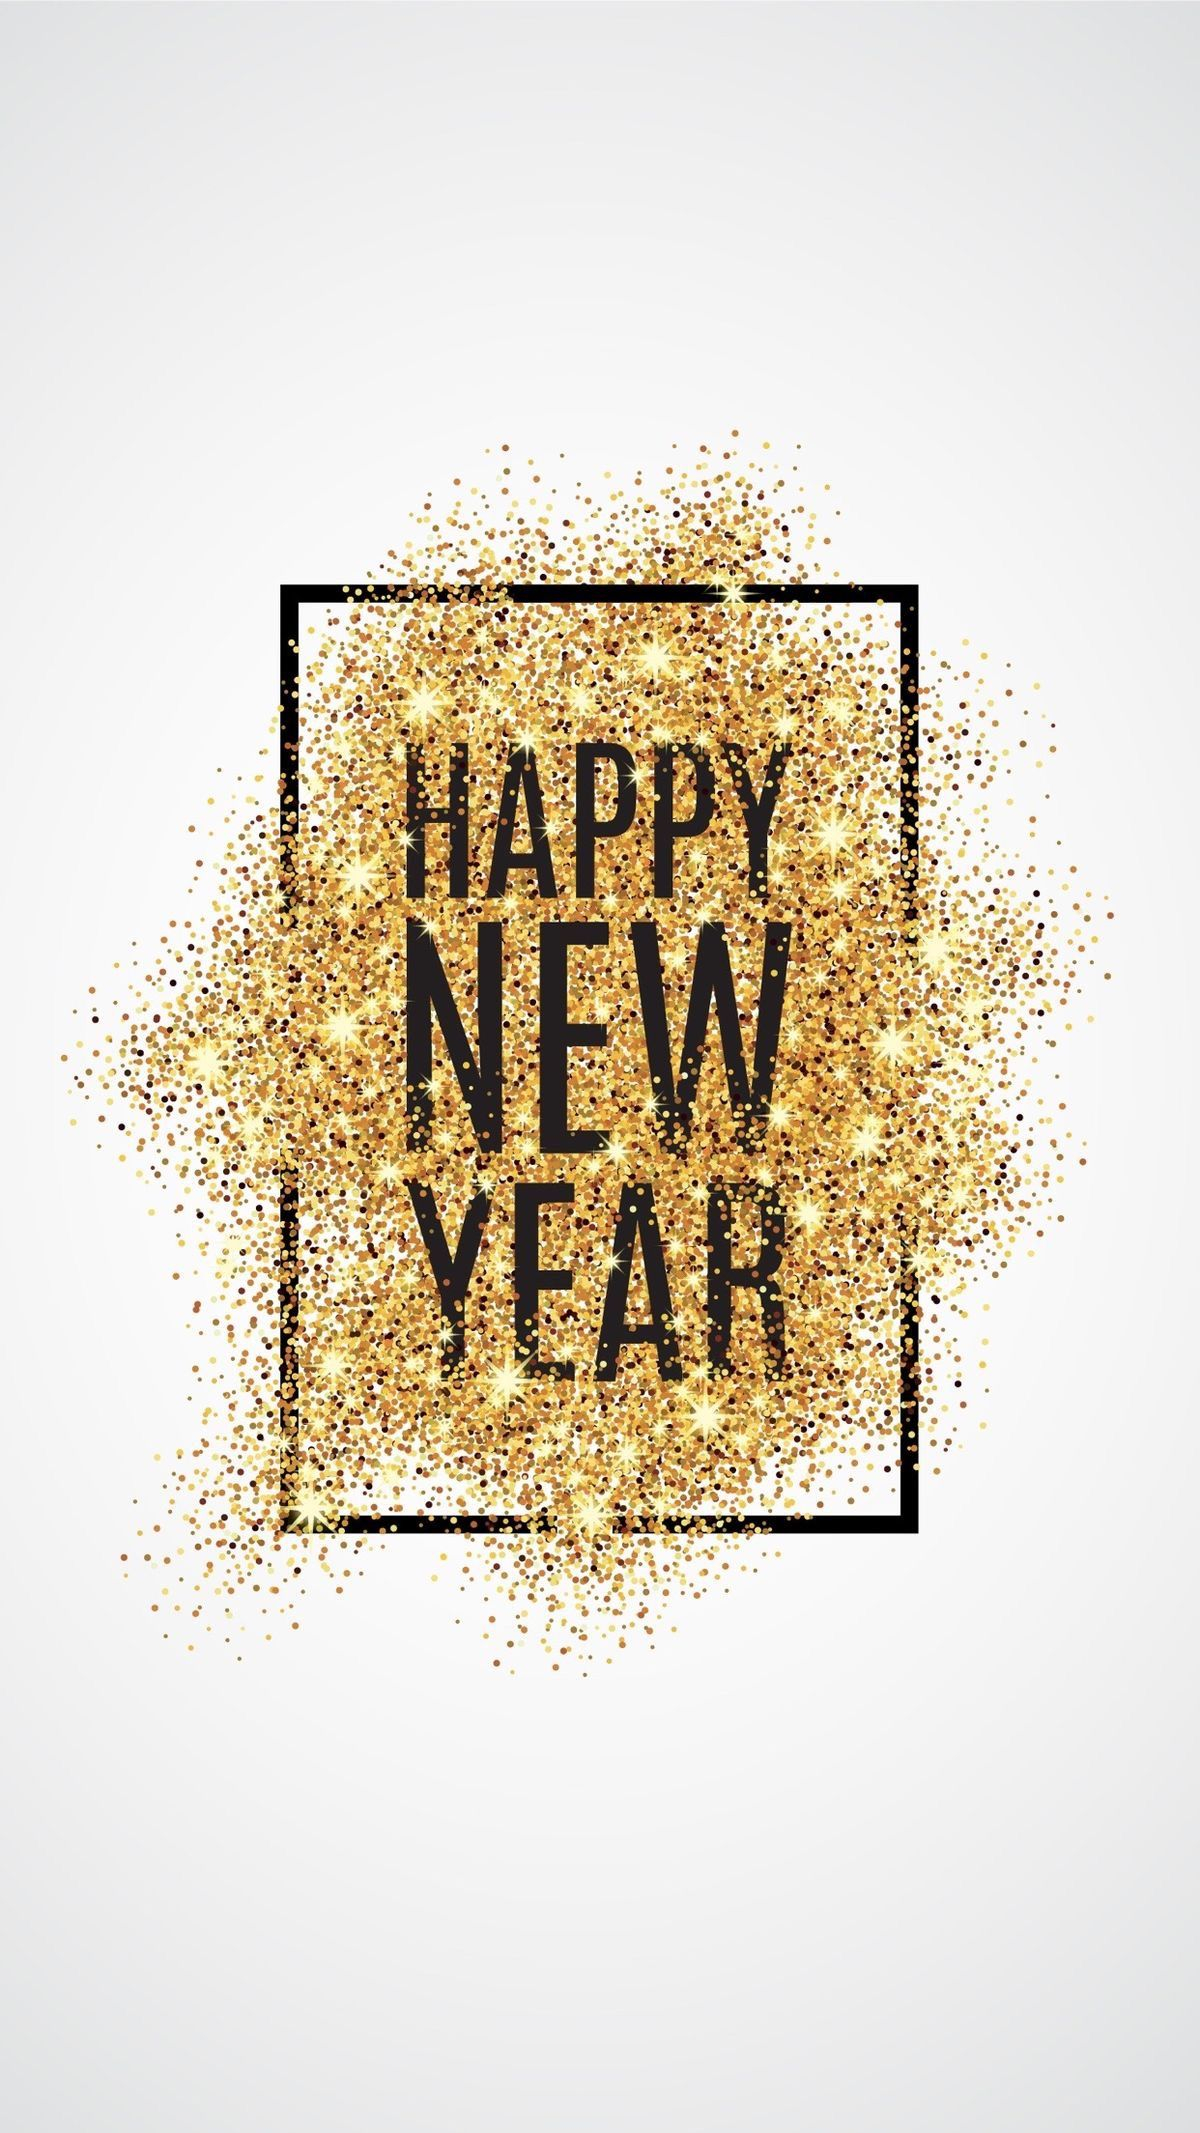 1200x2133 Pin by Joanne Cheshire on New Year | Happy new year wallpaper, New year wallpaper, Holiday wallpaper